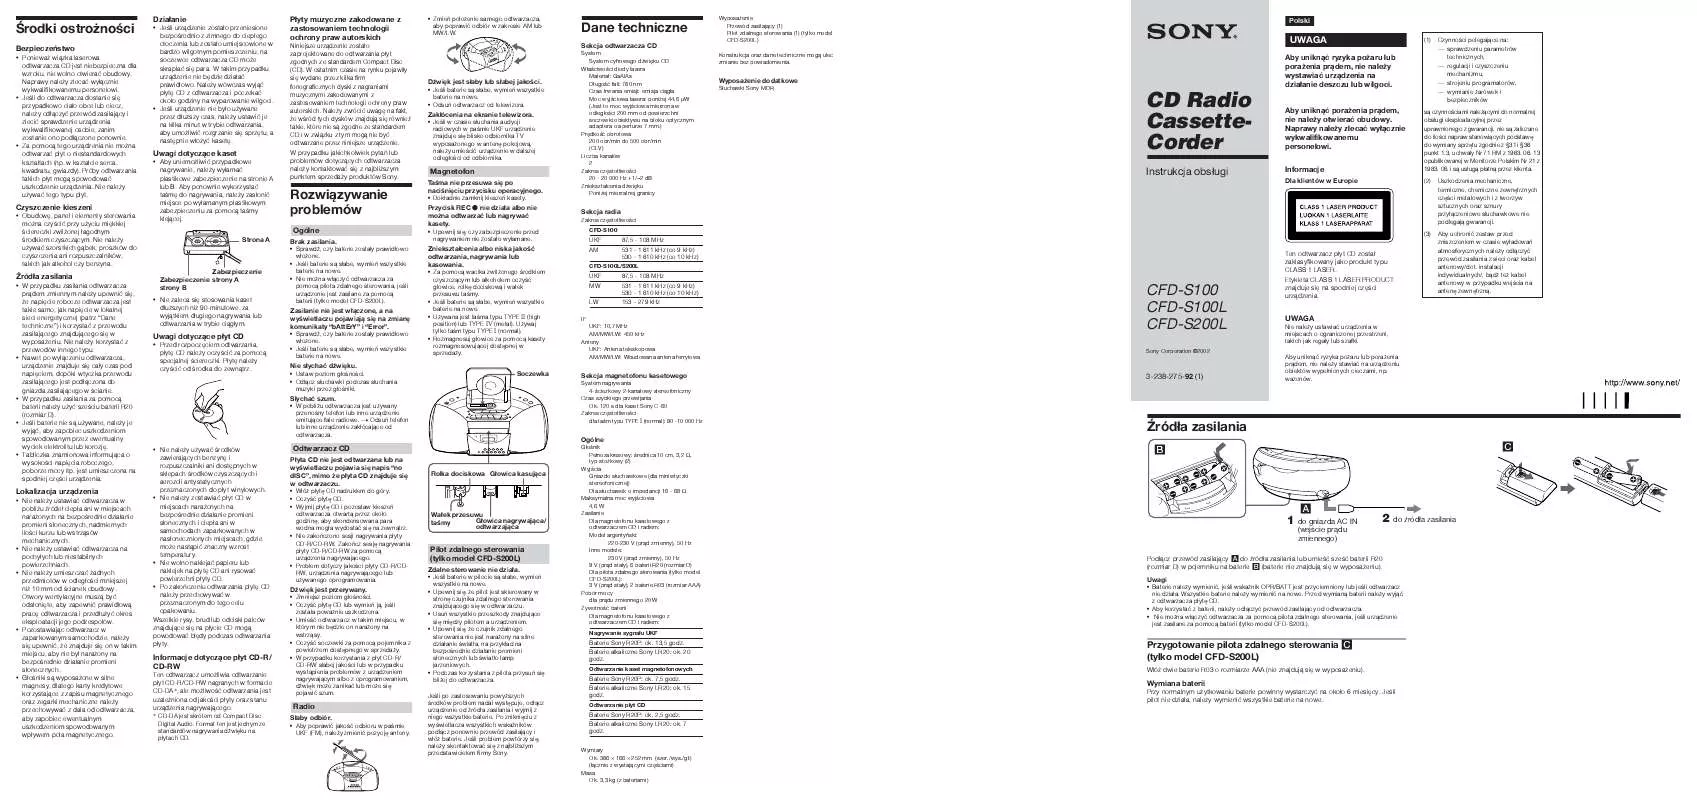 Mode d'emploi SONY CFD-S200L